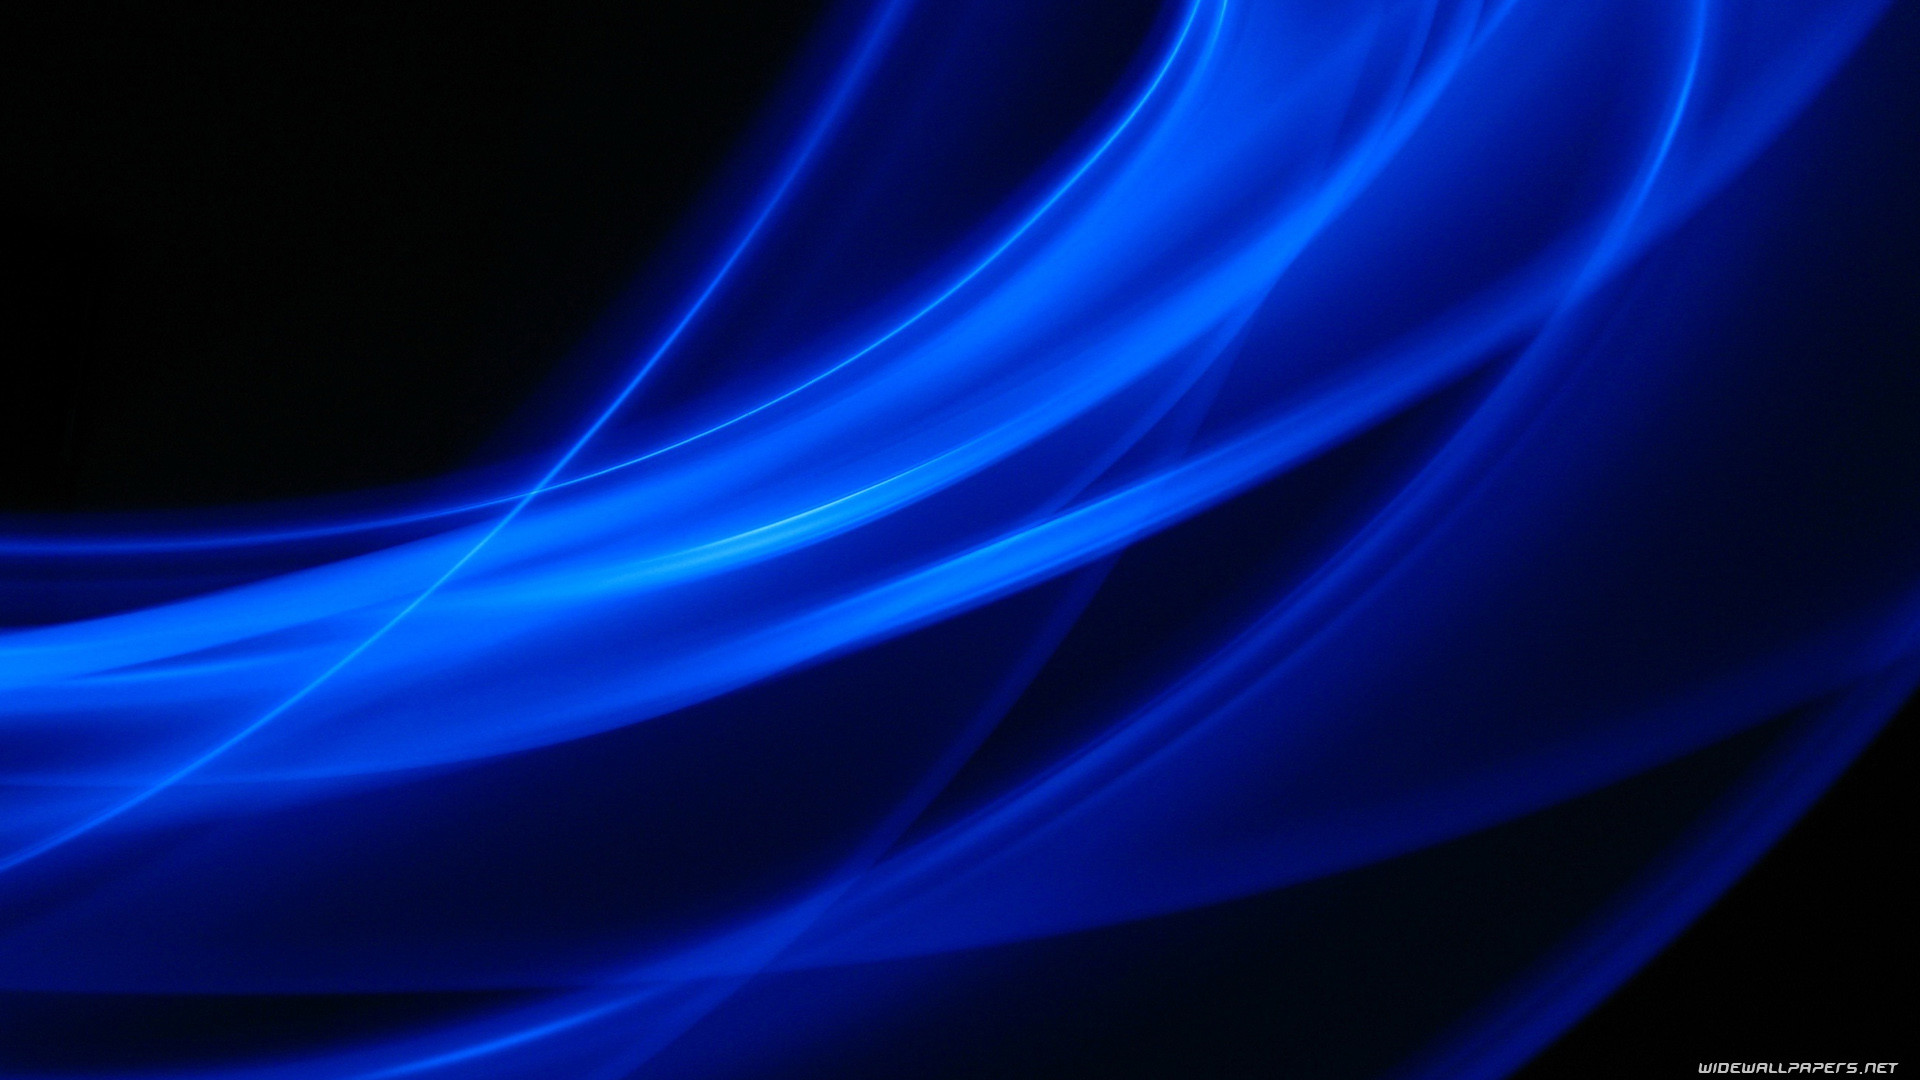 1920x1080 Black and Blue Abstract Widescreen HD Wallpaper